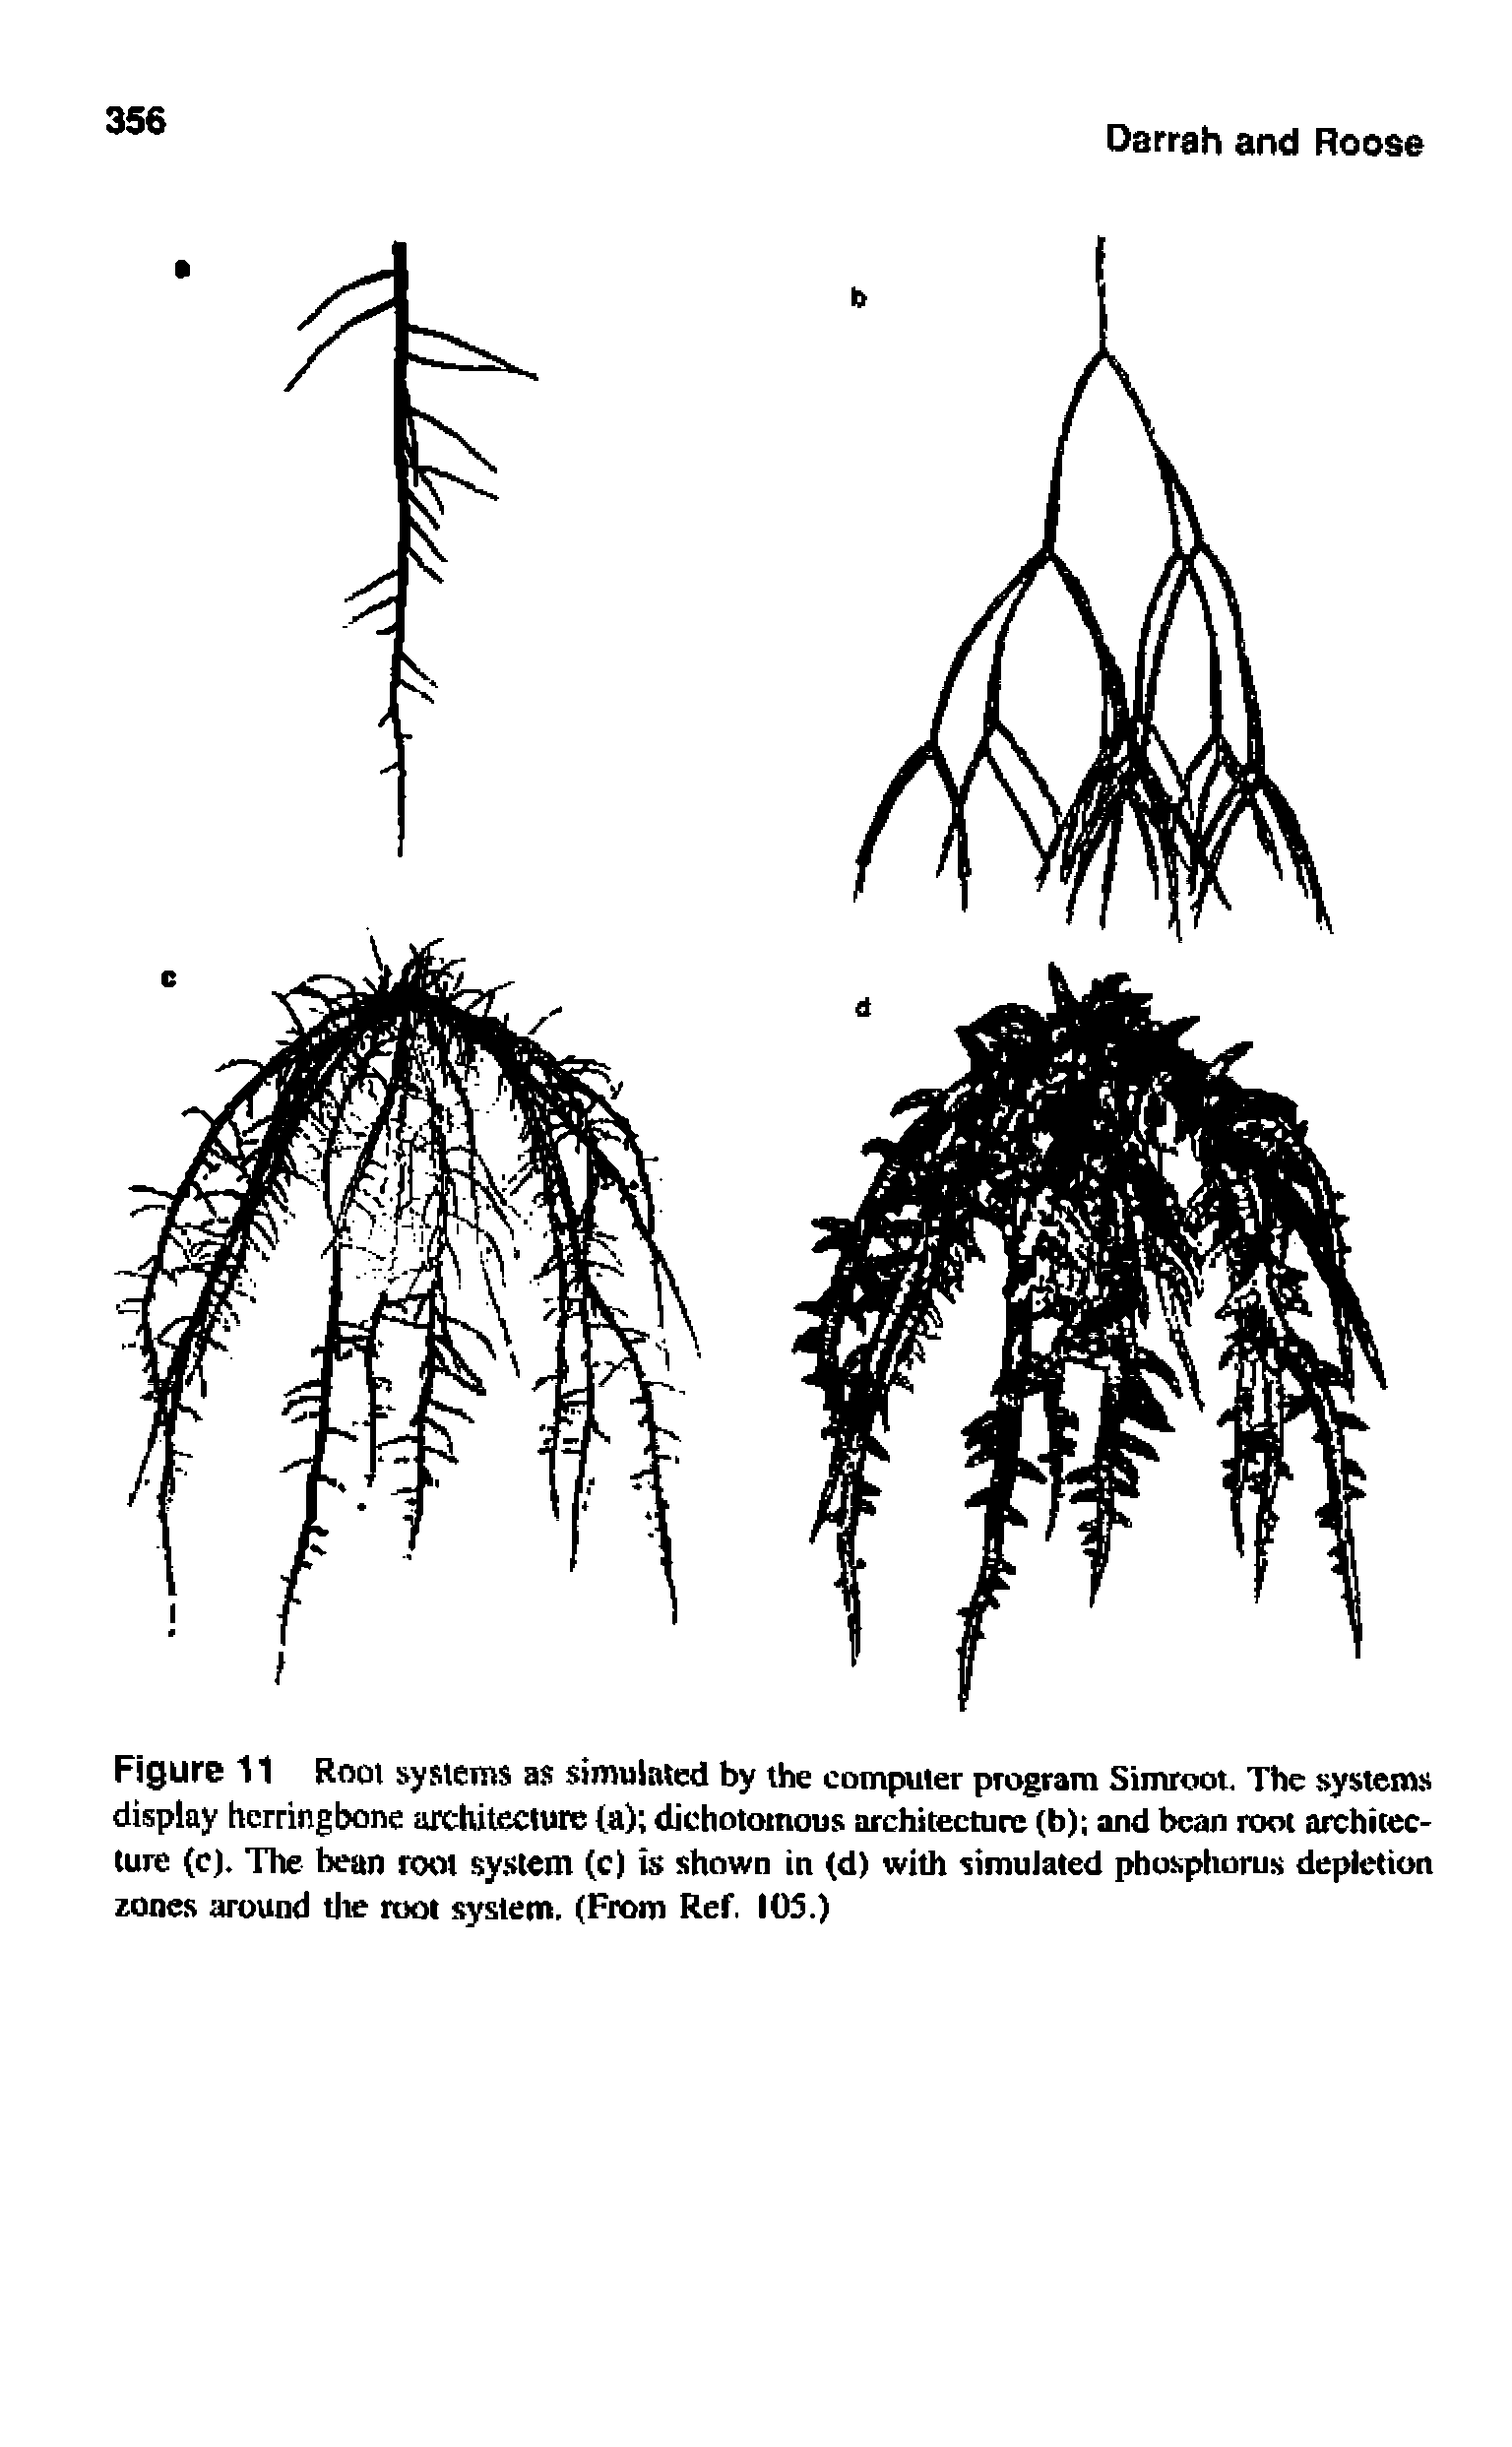 Figure 11 Root systems as simulated by the computer program Simroot. The systems display herriitgbone architecture (a) dichotomous architecture (b) and bean root architecture (c). The bean root system (c) is shown in <d) with simulated phosphorus depletion zones around tlie root system. (From Ref. 105.)...